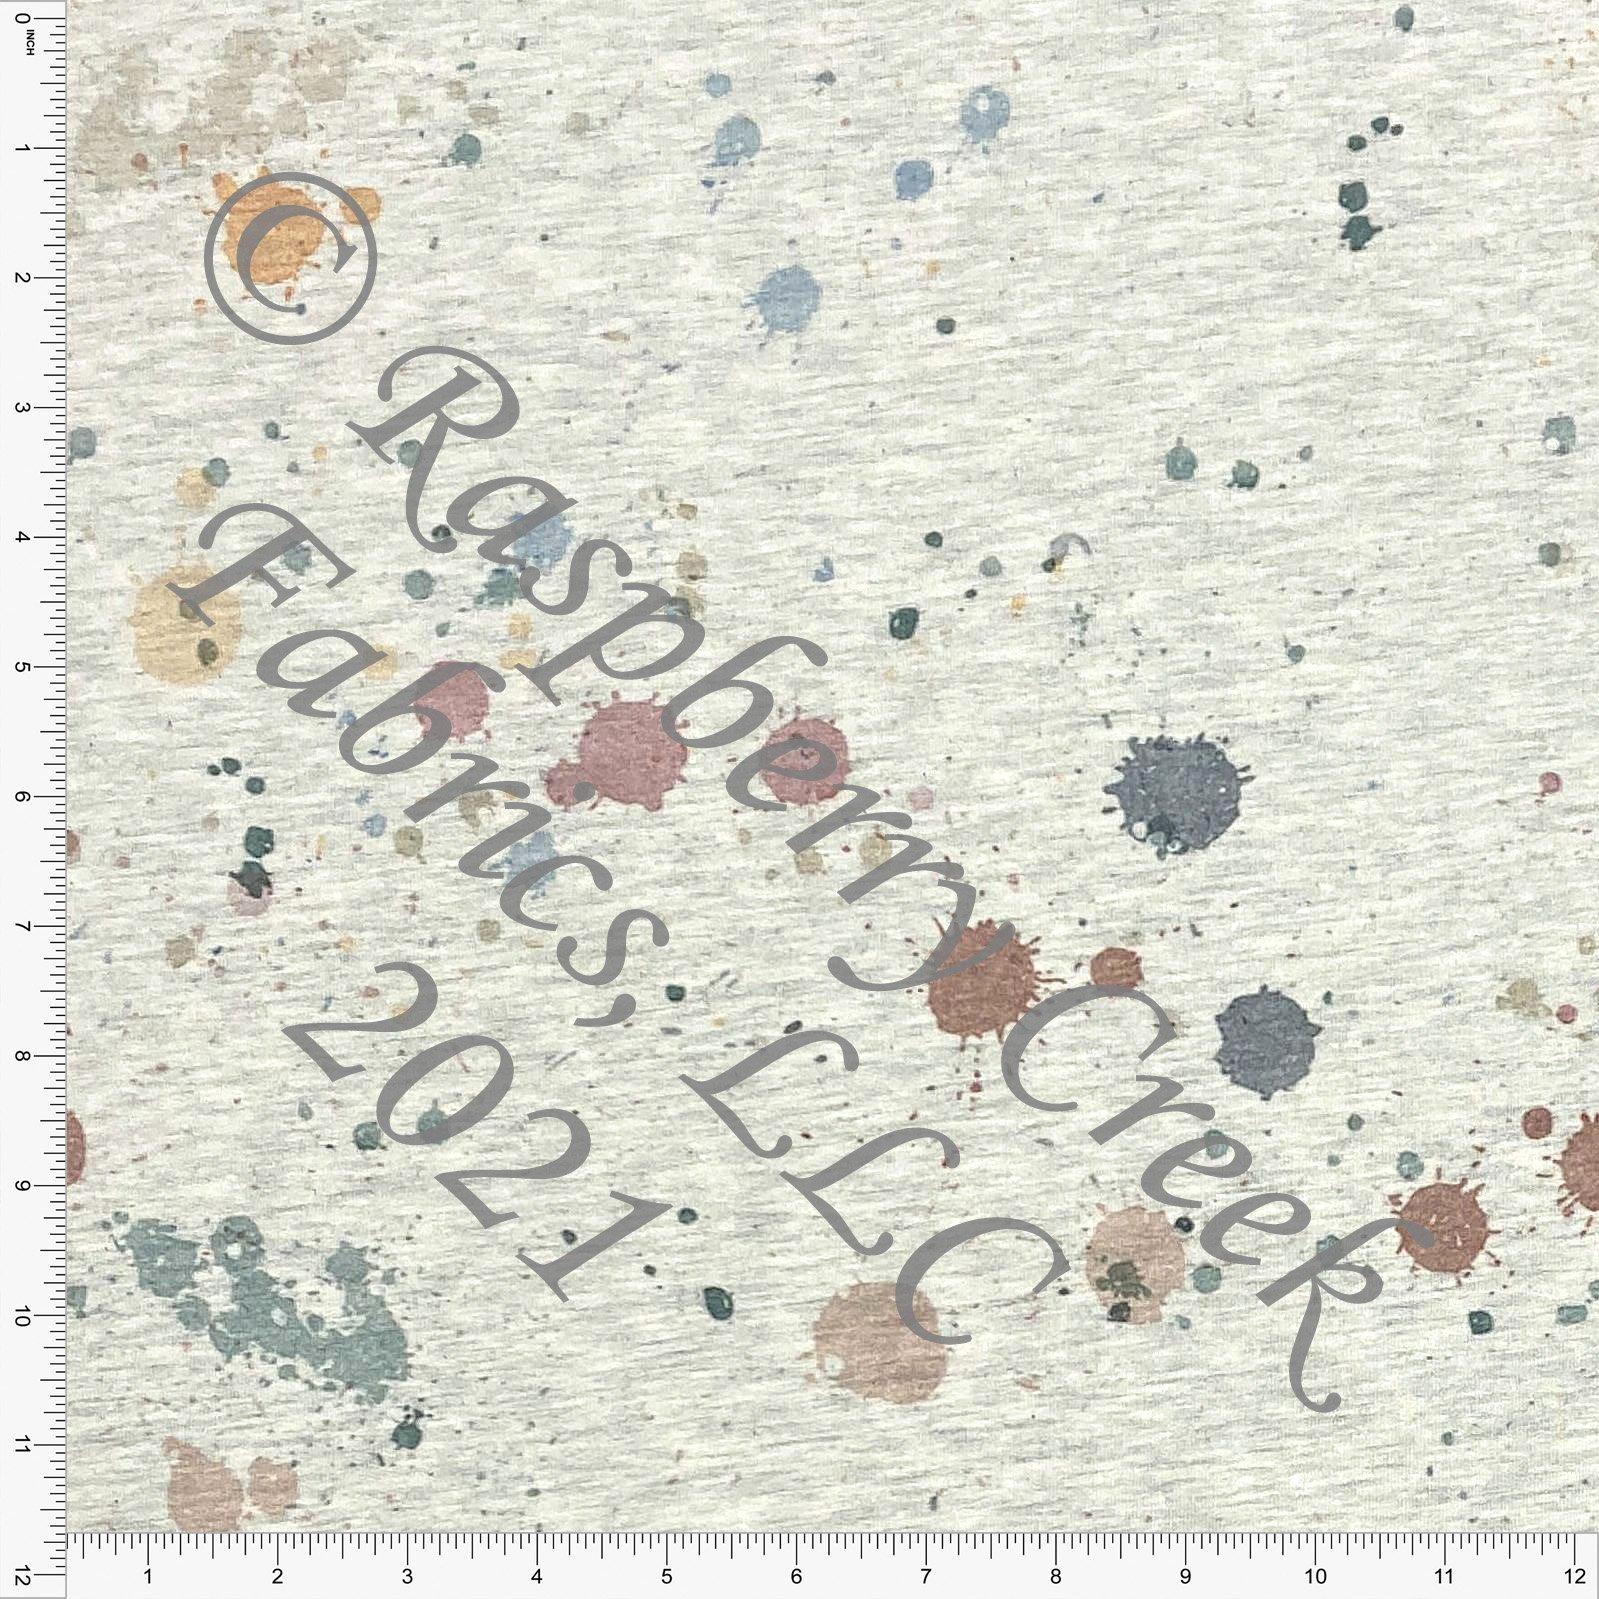 Denim Blue Orange Sage and Charcoal Paint Splatter on Oatmeal 4 Way Stretch French Terry Knit Fabric, By Bri Powell Fabric, Raspberry Creek Fabrics, watermarked, restored